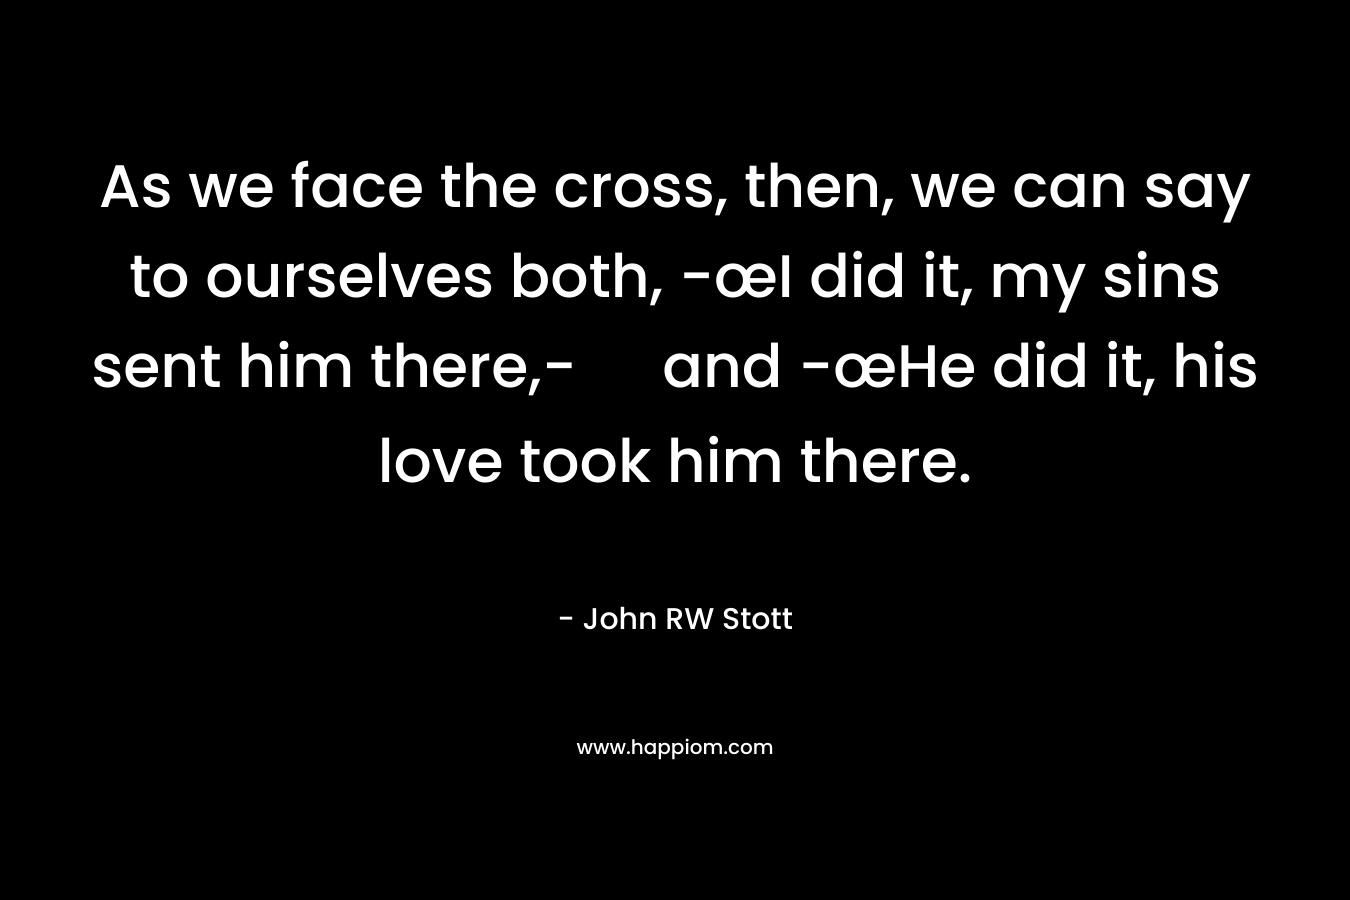 As we face the cross, then, we can say to ourselves both, -œI did it, my sins sent him there,- and -œHe did it, his love took him there.